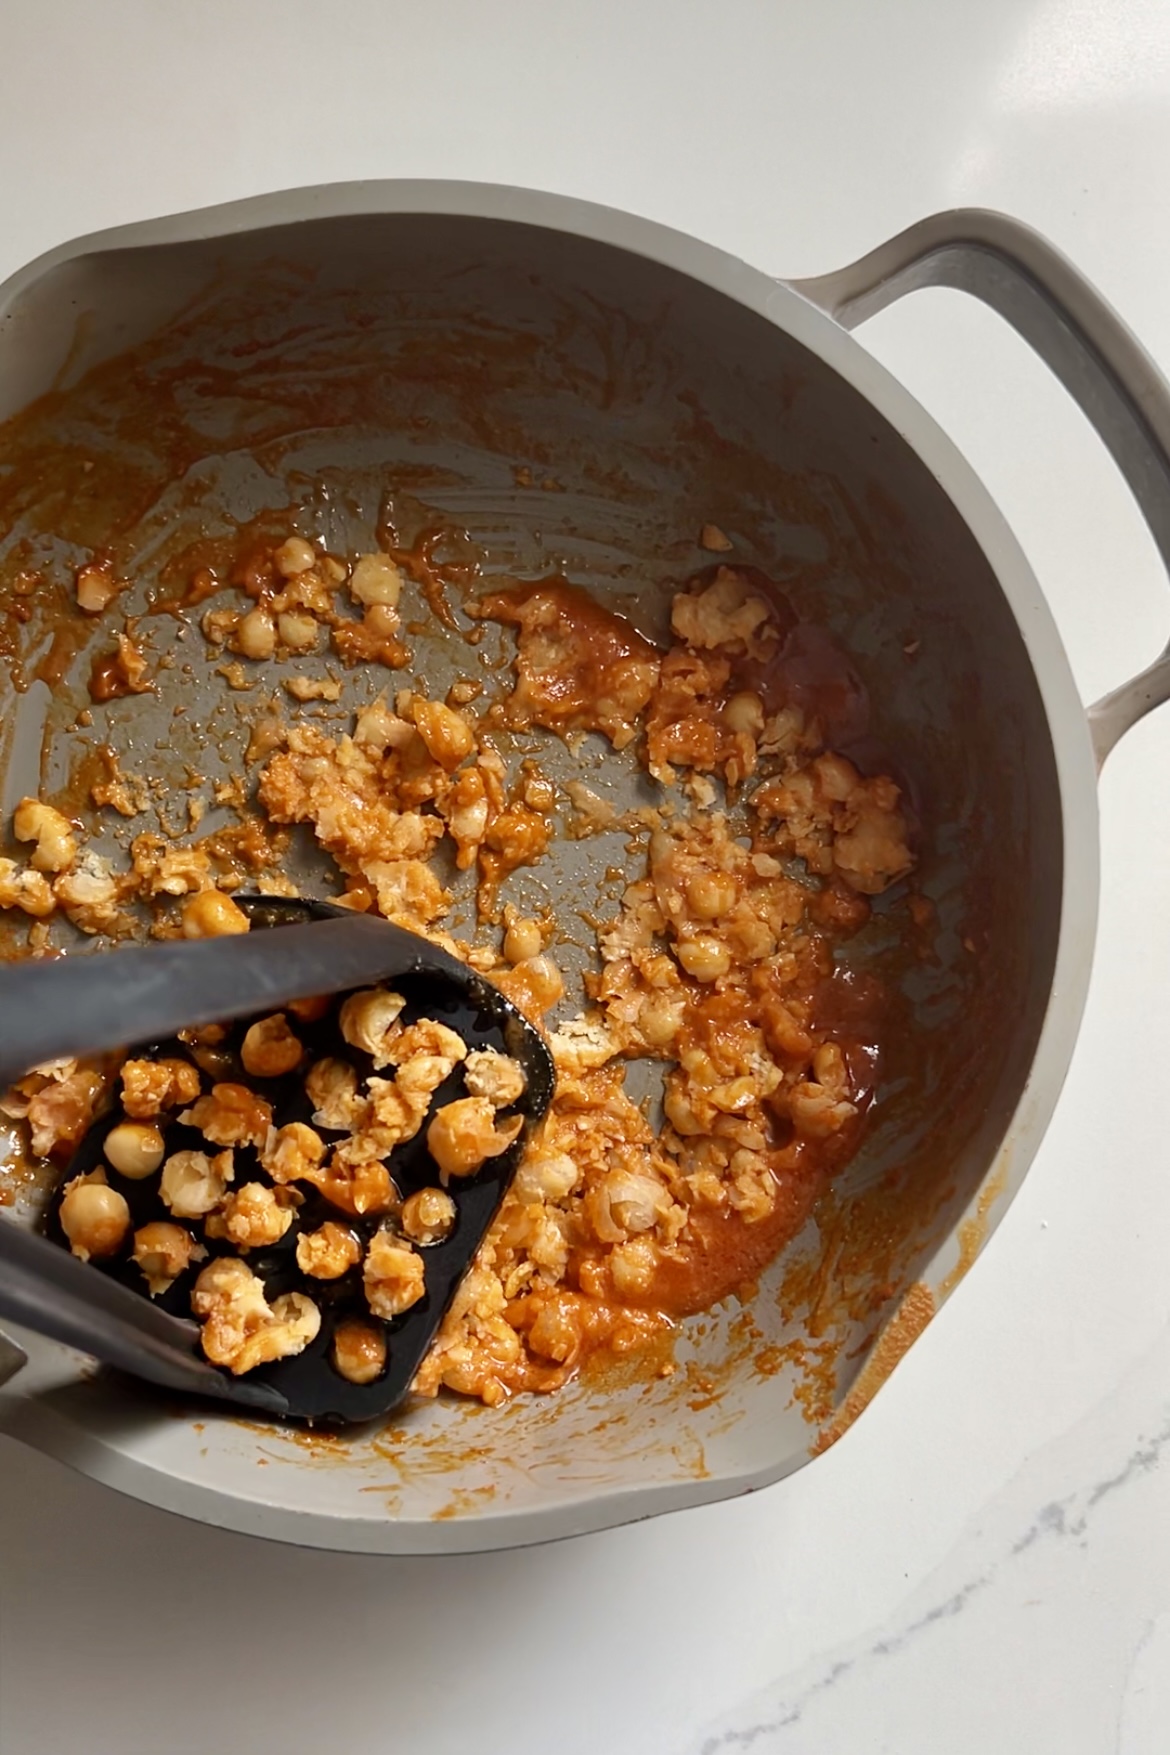 A non-stick saucepan containing smashed chickpeas mixed with a Buffalo red sauce. A black slotted spoon is positioned on the left side of the pan, partially mashing some chickpeas. The pan has two handles, one on each side. The background is a white surface.